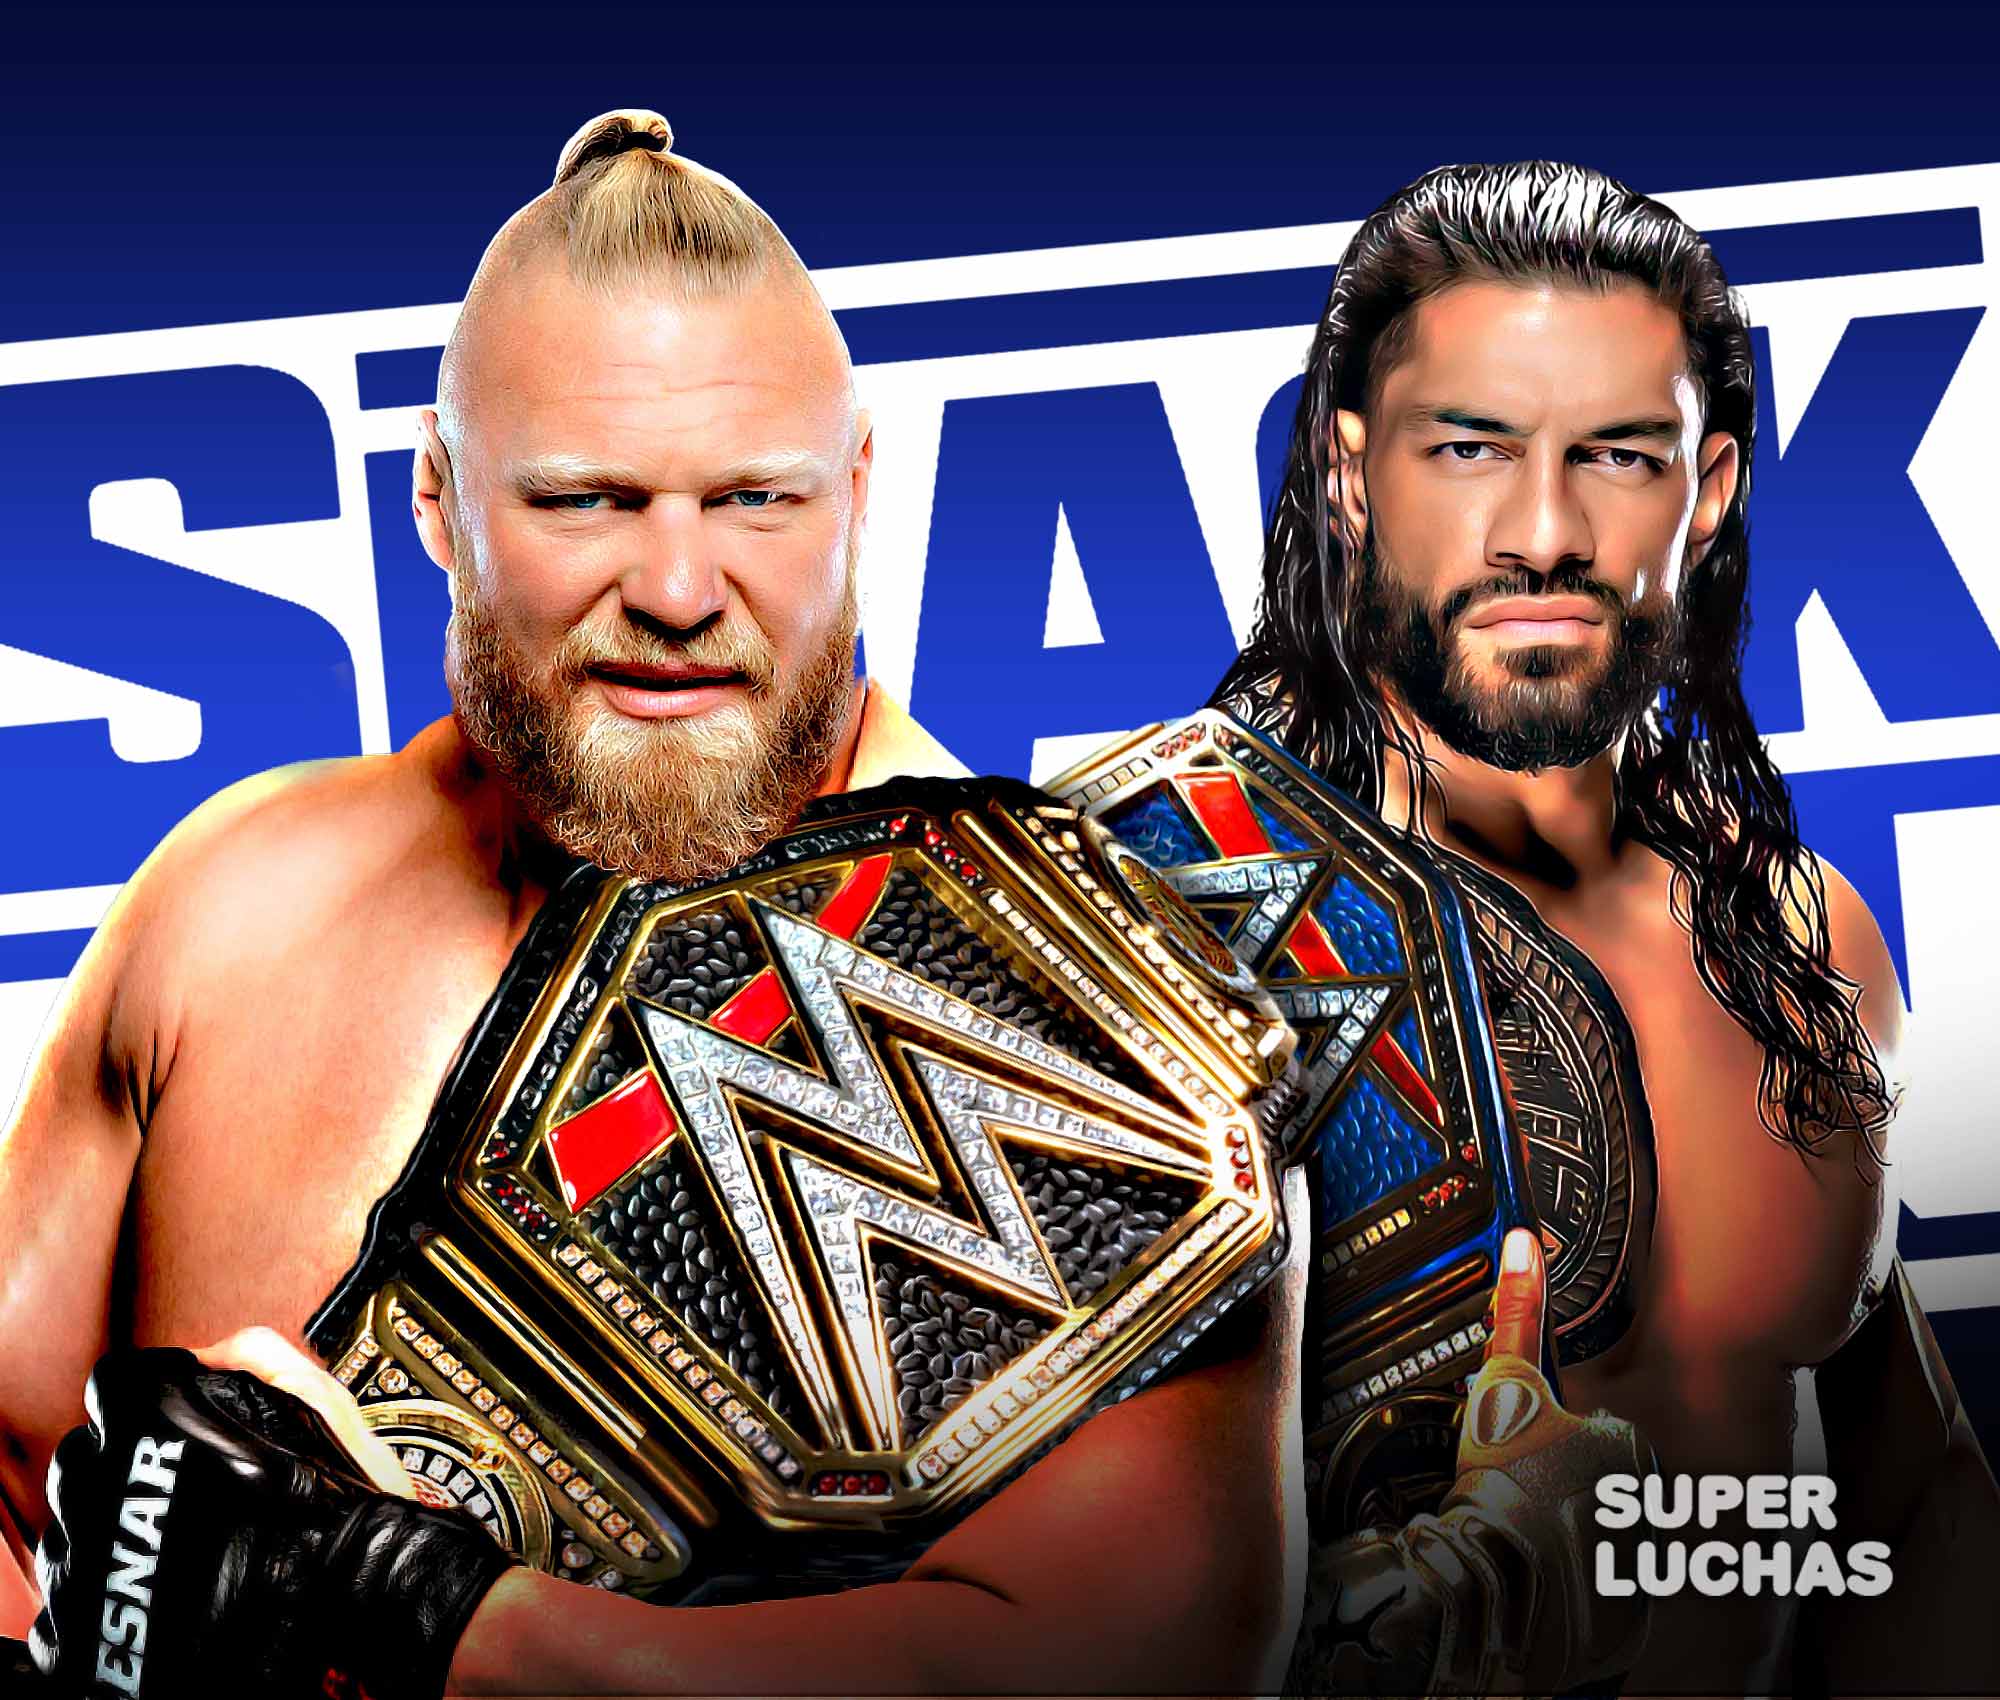 WWE SMACKDOWN January 7 2022 Live results Champions